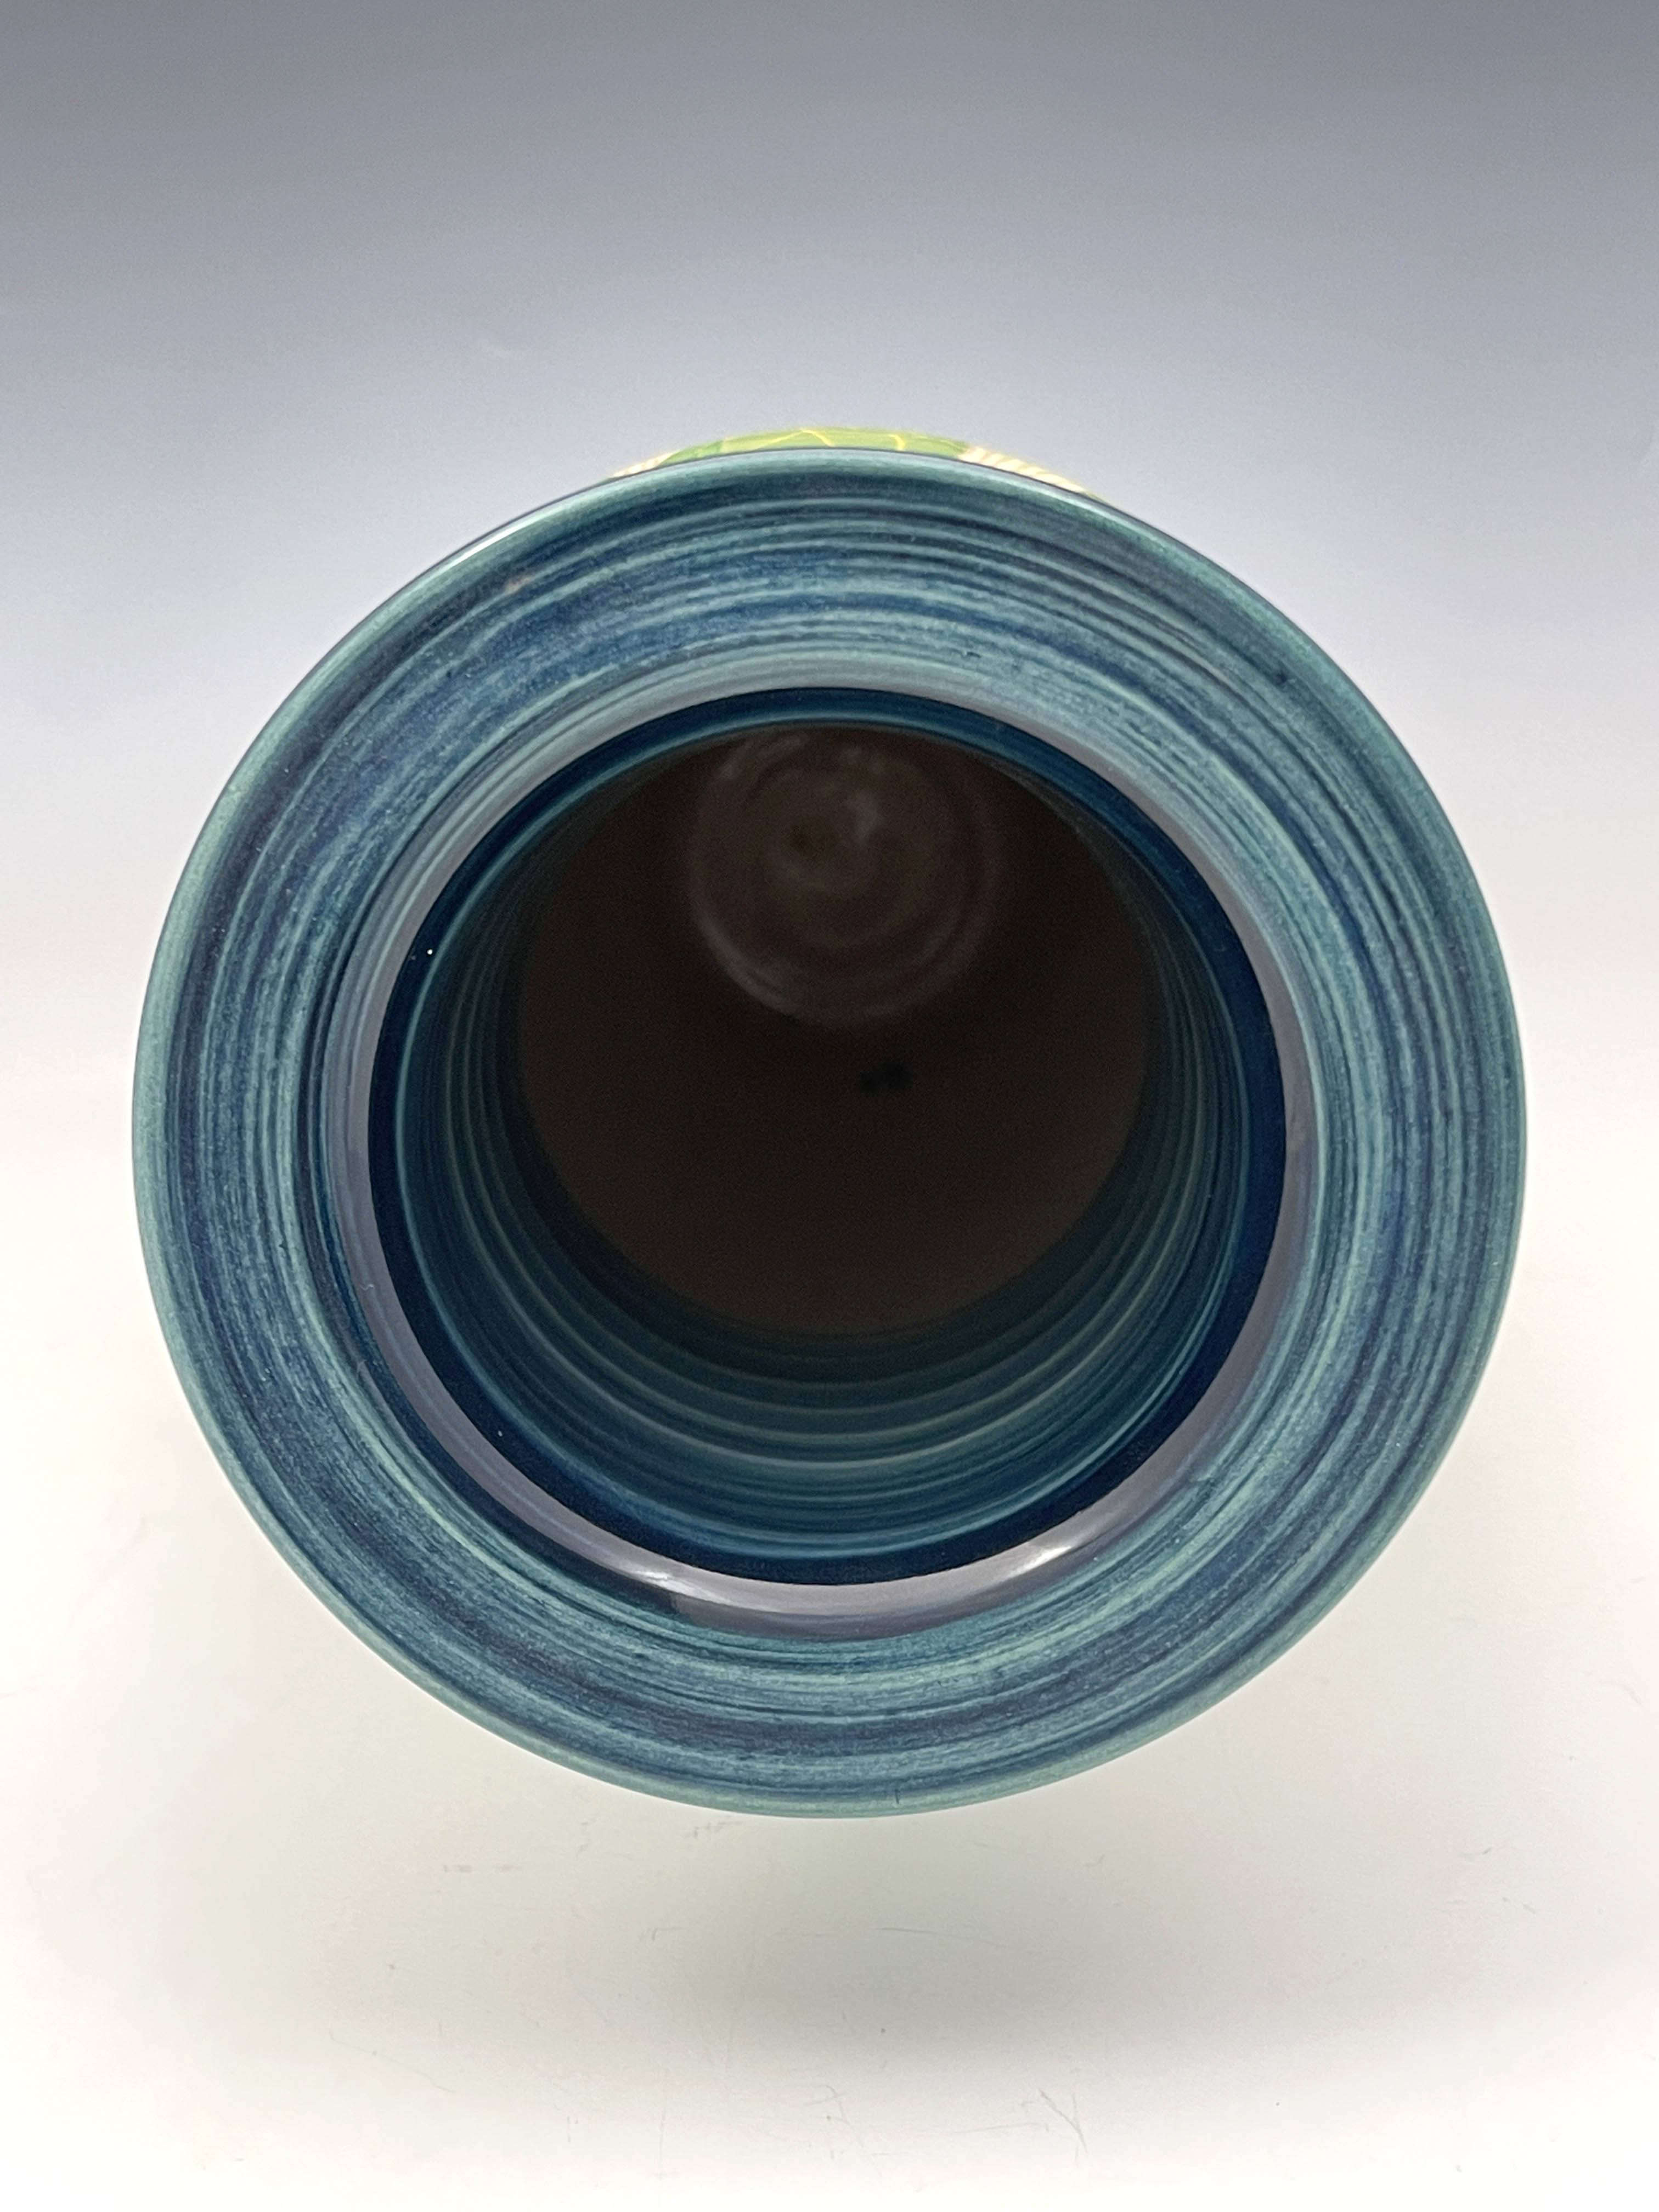 Sally Tuffin for Dennis Chinaworks, Datura pattern vase, Etruscan form, 2002, marked No 1, 41cm high - Image 3 of 5